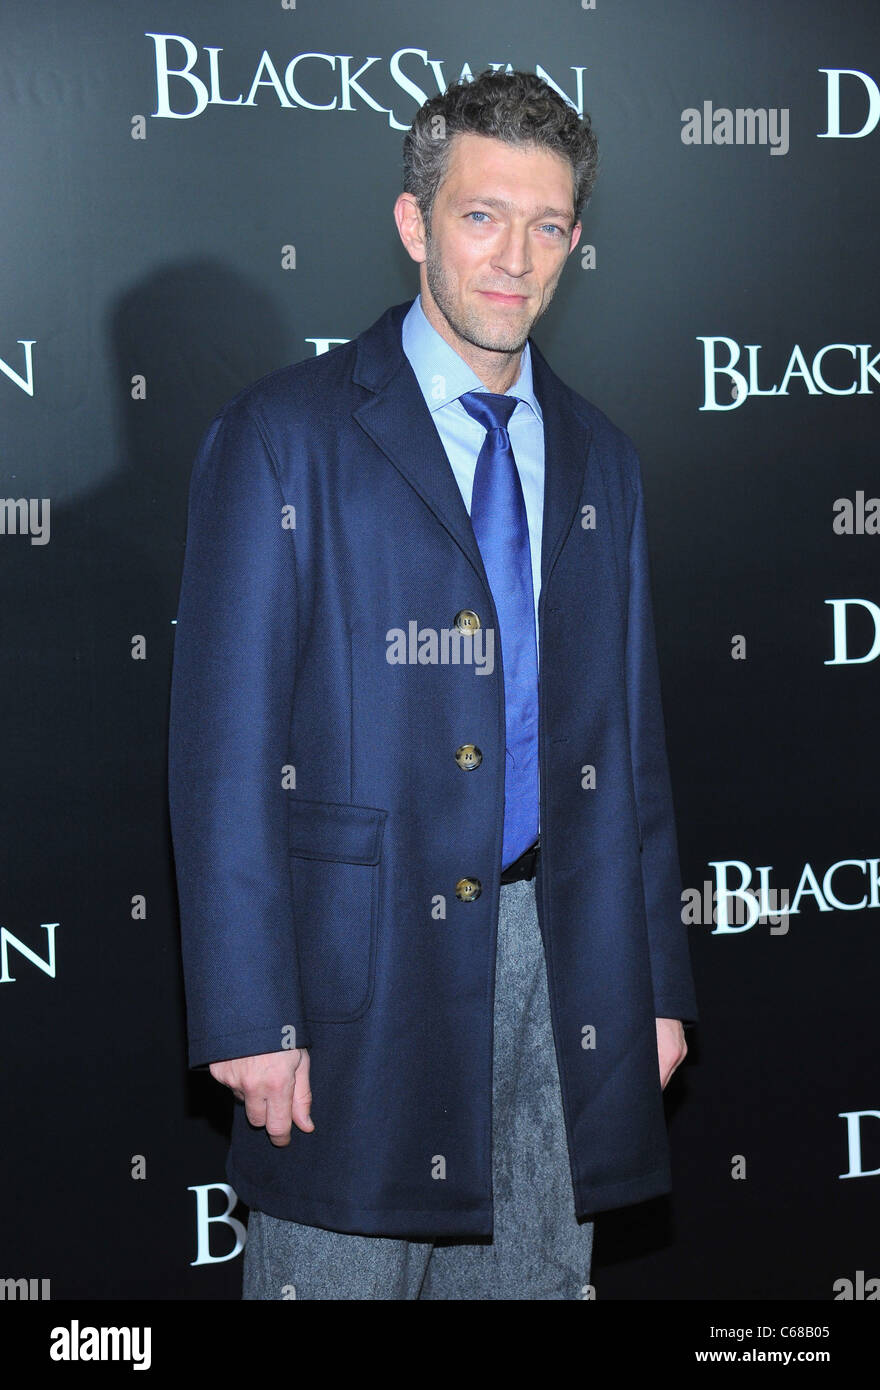 Vincent Cassell at arrivals for BLACK SWAN Premiere, The Ziegfeld Theatre, New York, NY November 30, 2010. Photo By: Gregorio T. Binuya/Everett Collection Stock Photo